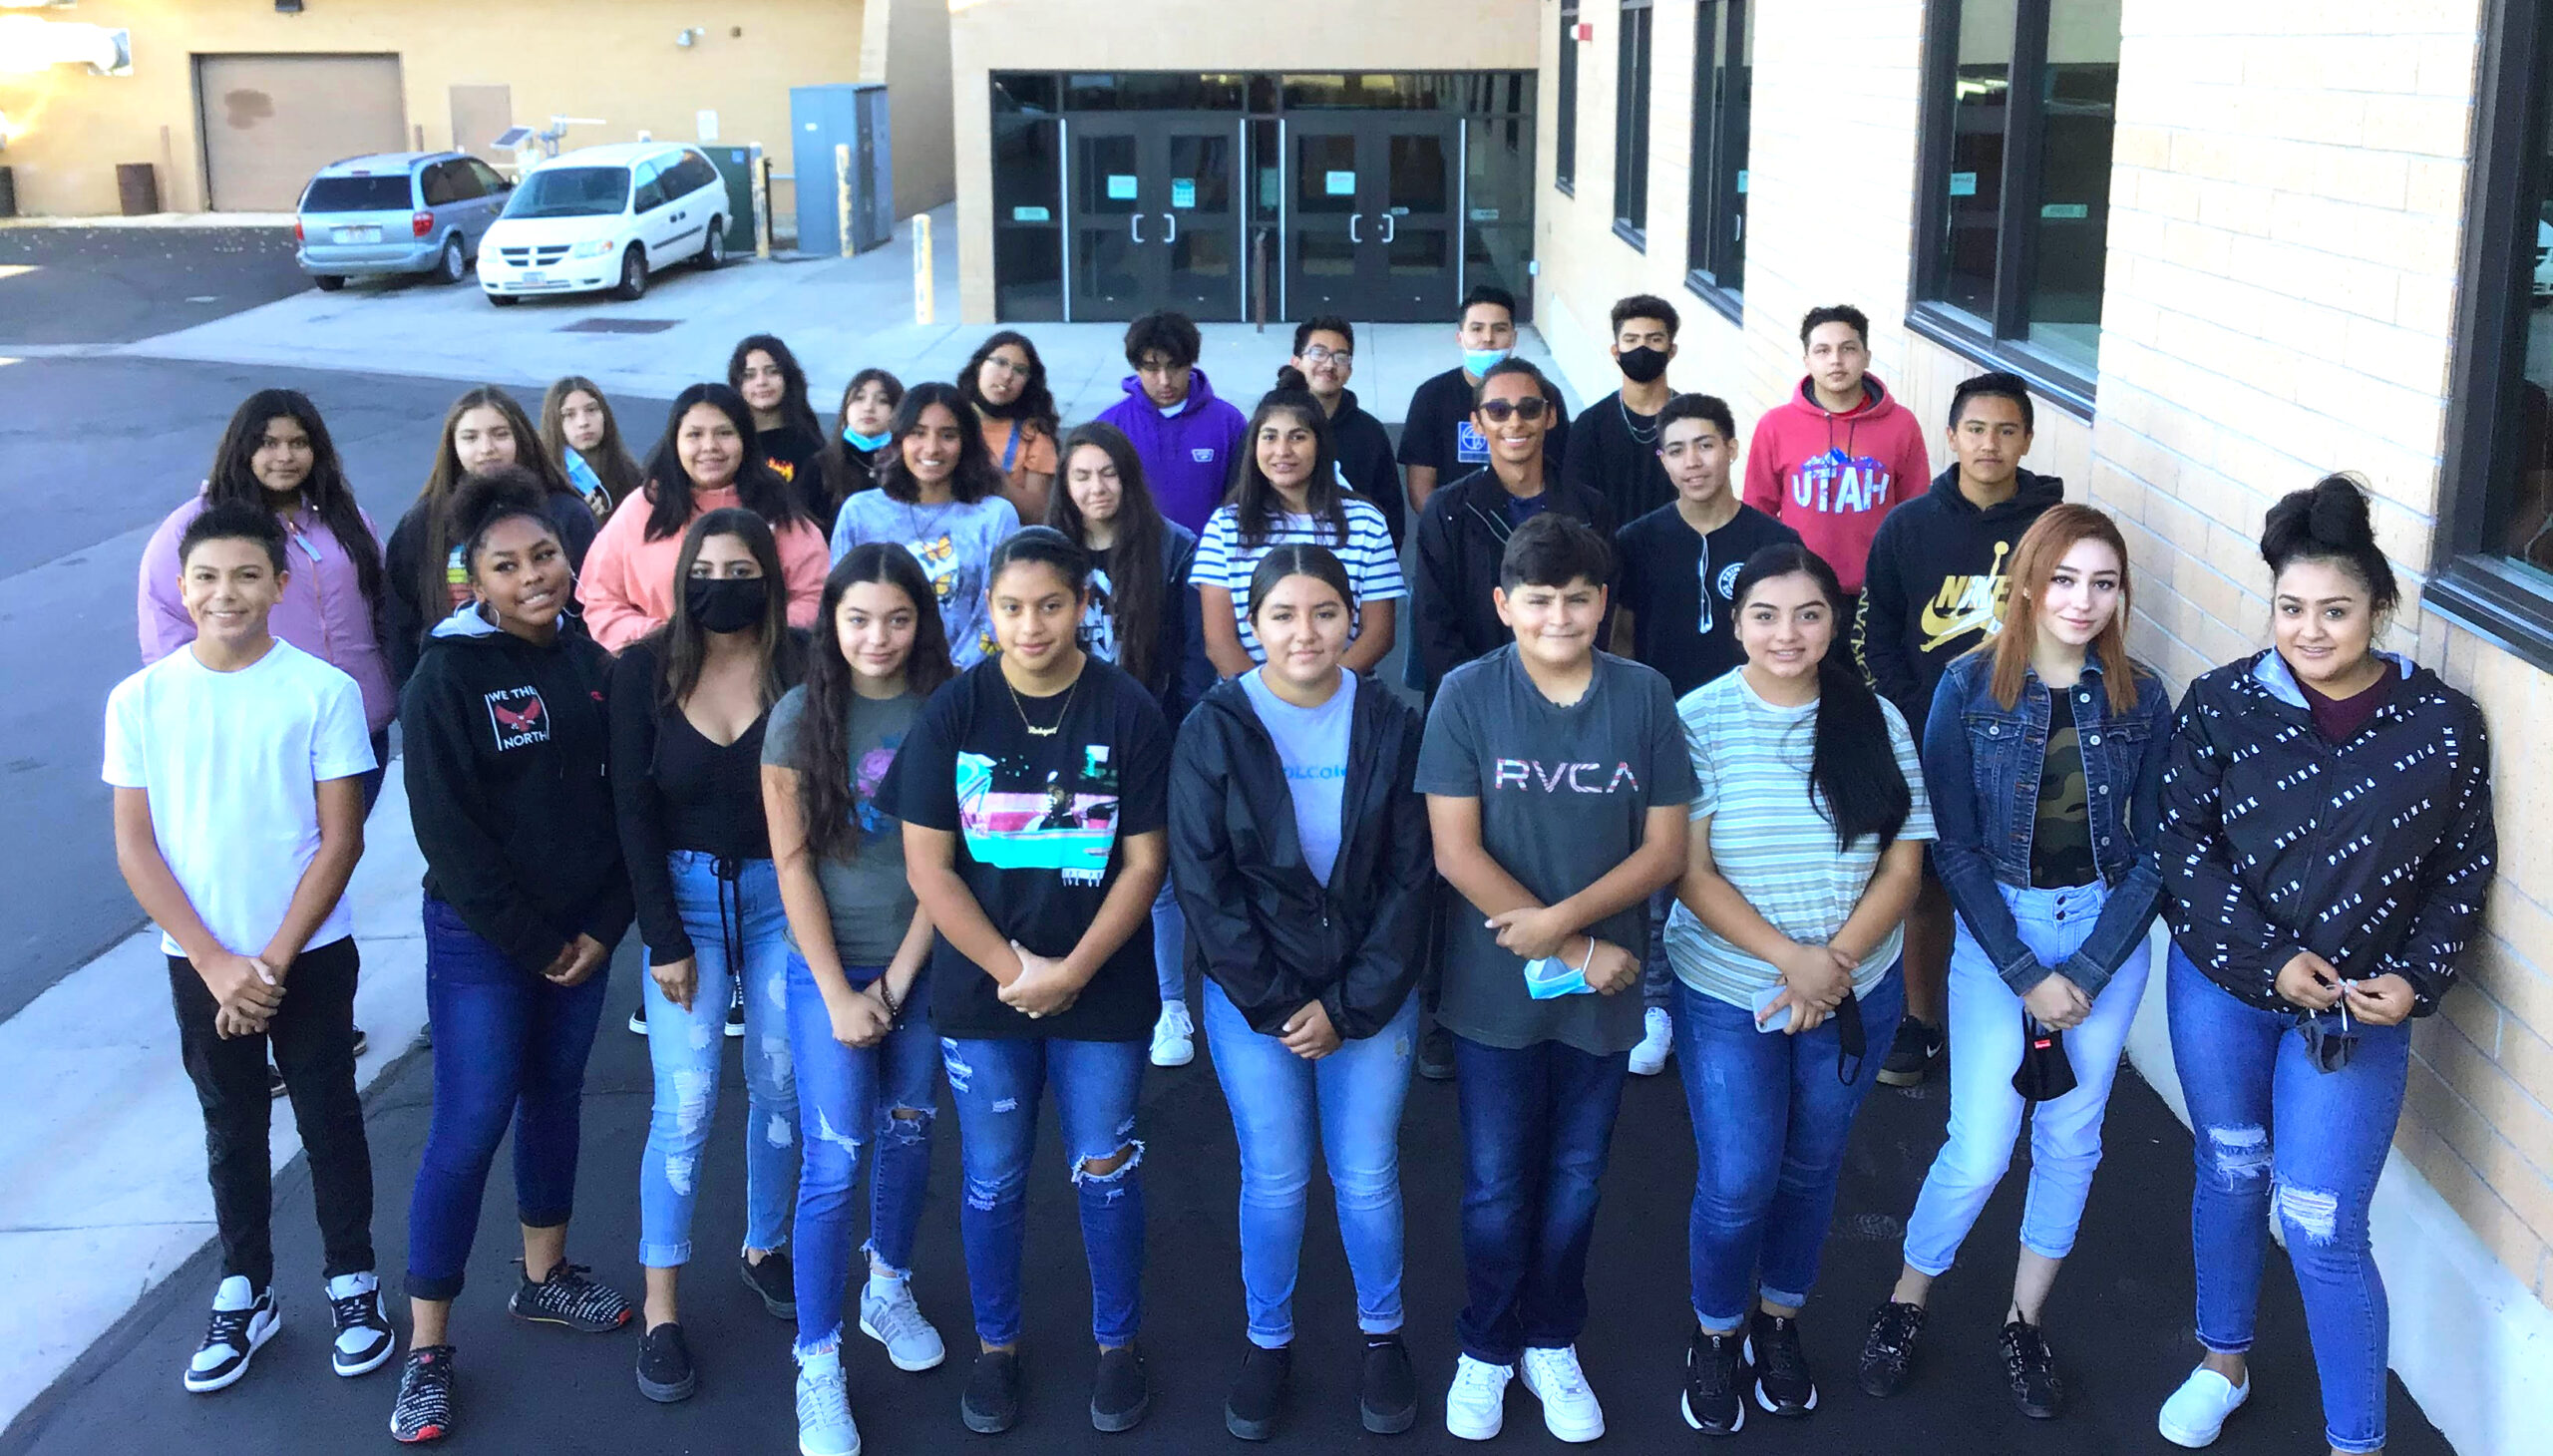 Latino students speak out on importance of equity